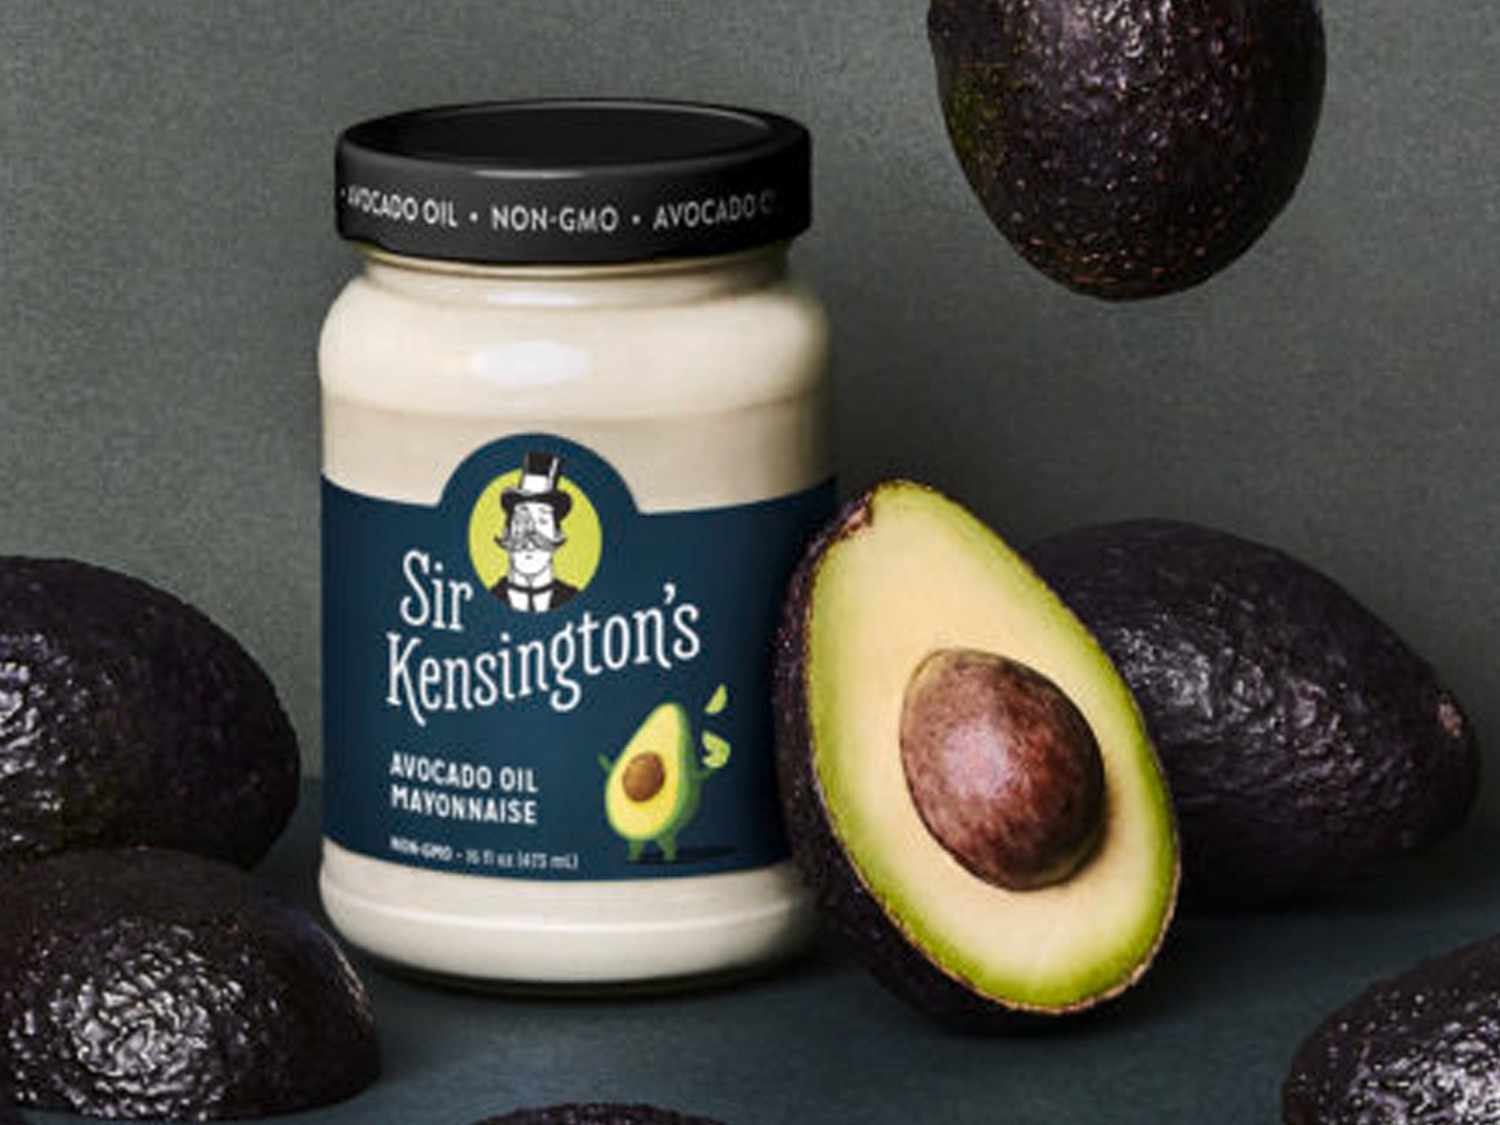 Our avocado oil mayo is now sugar free!